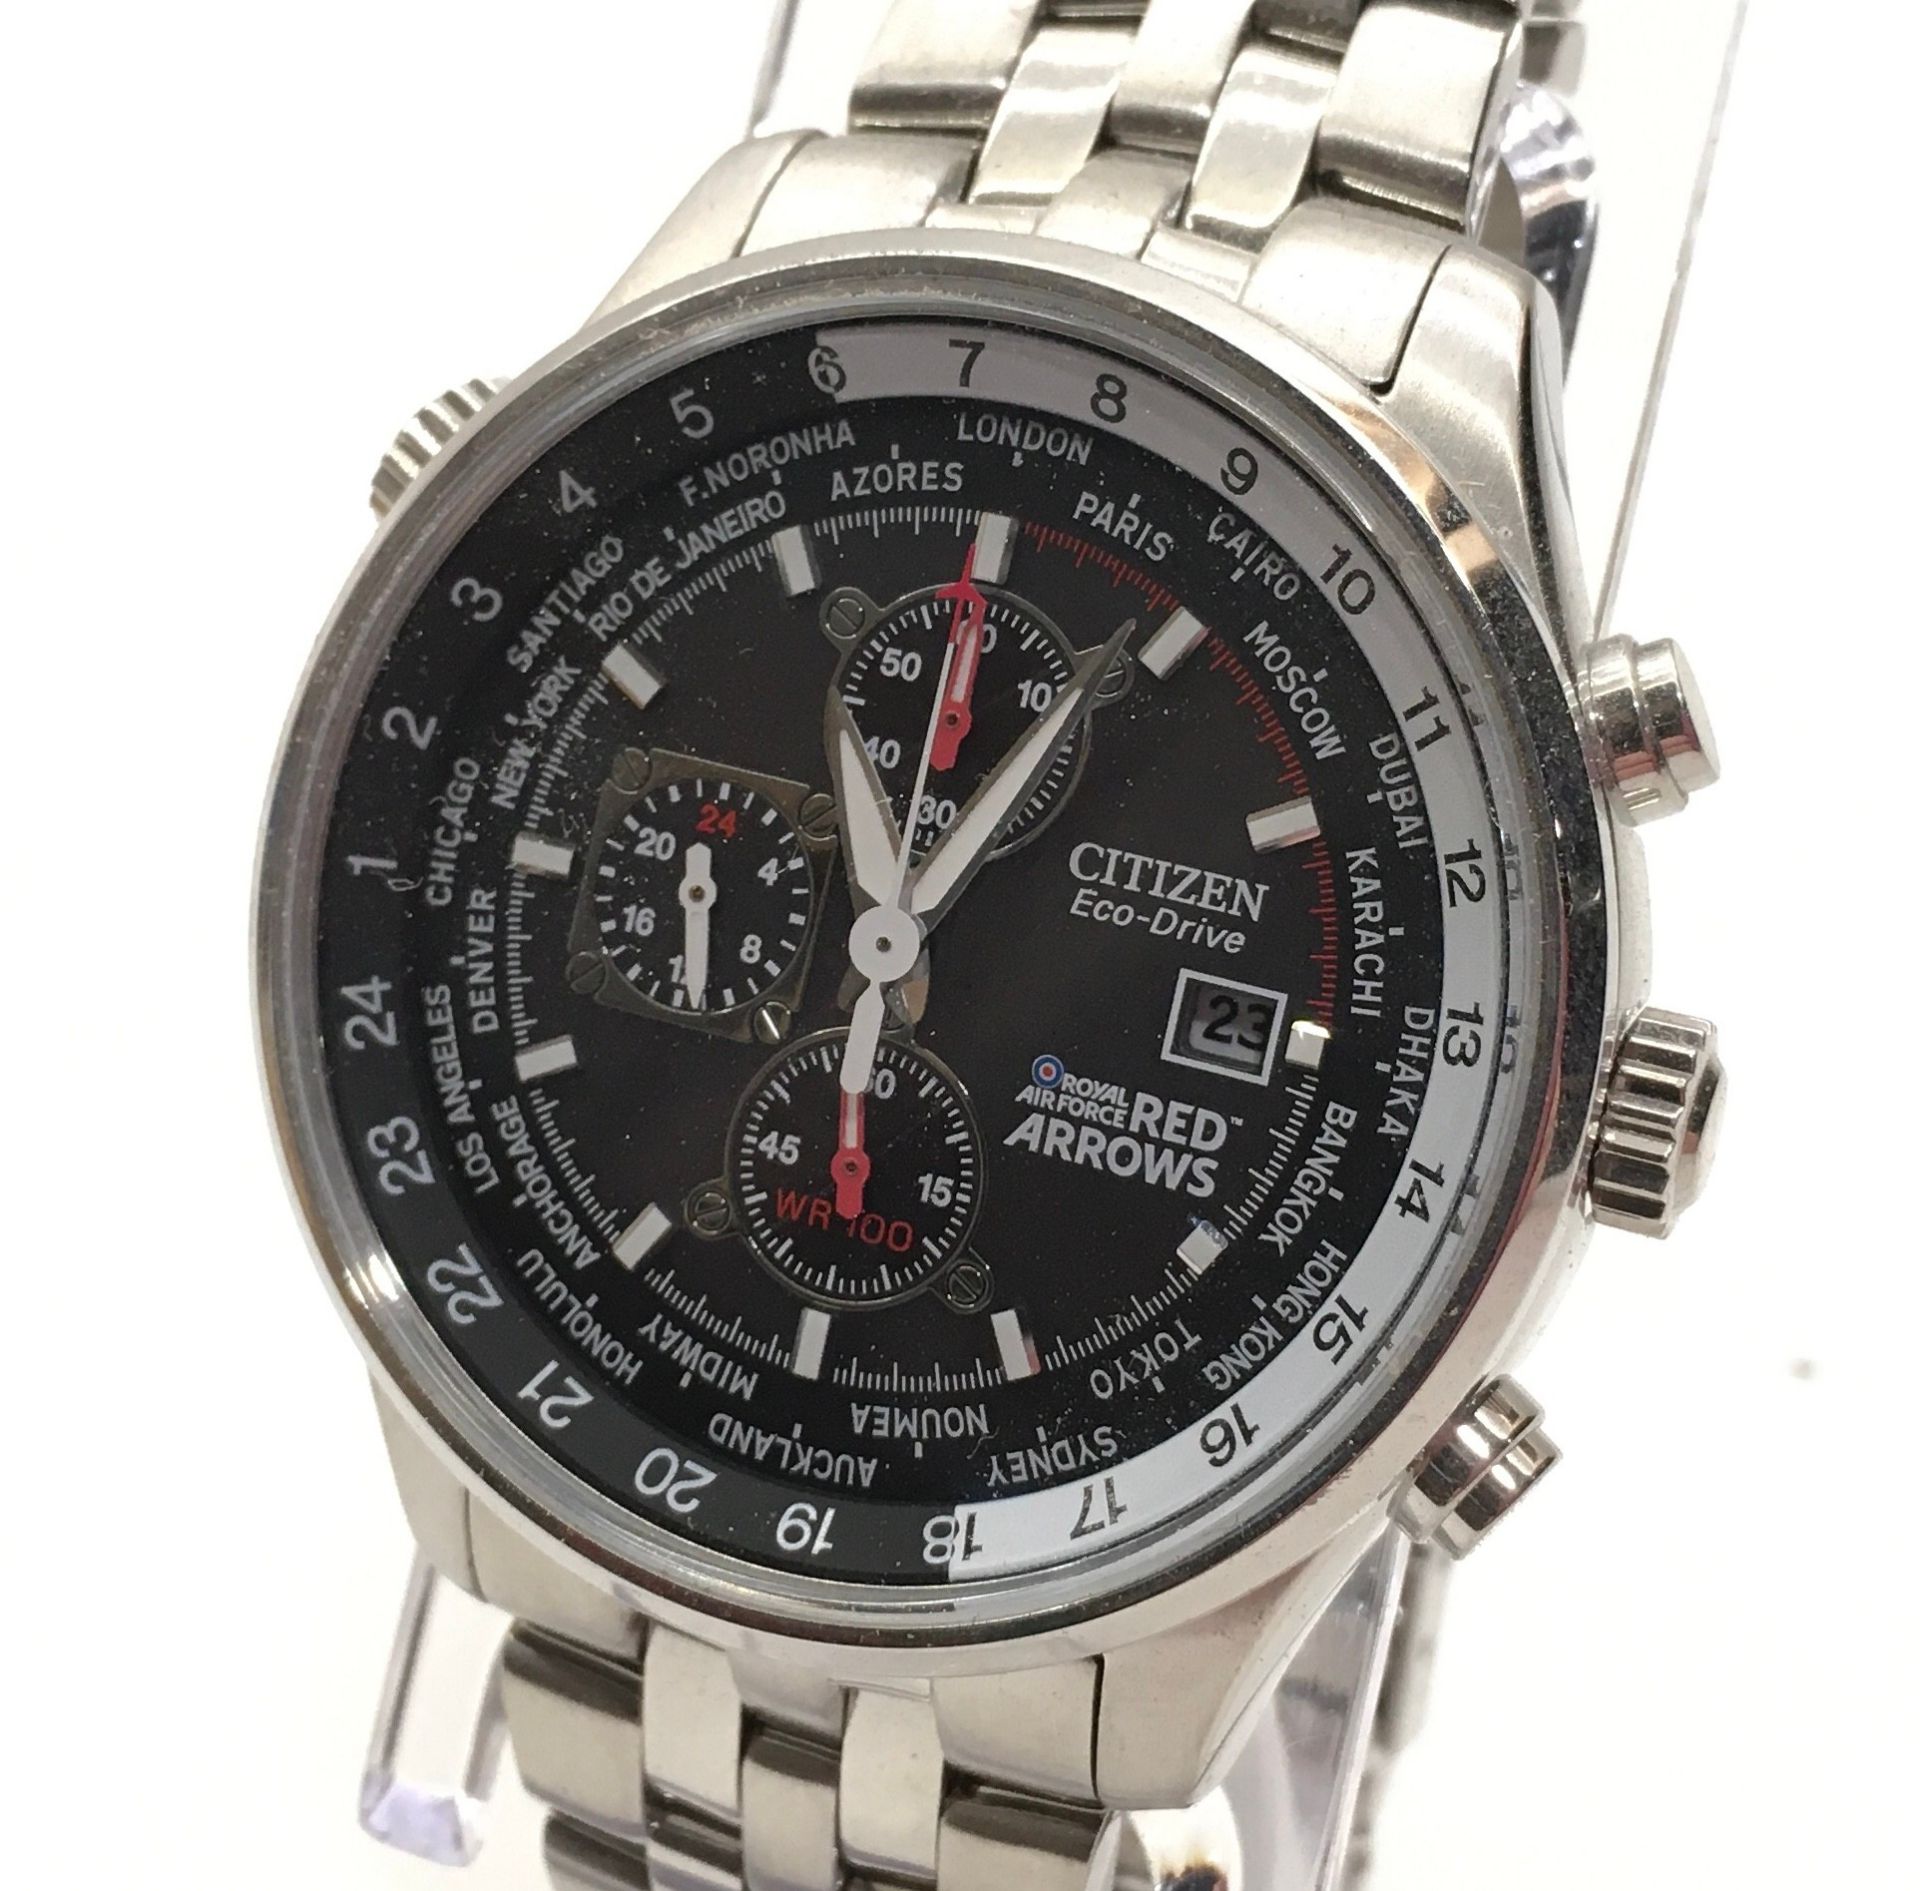 Collectible gents Citizen Eco-Drive Red Arrows chronograph. Model B612 S069149. Inner and outer